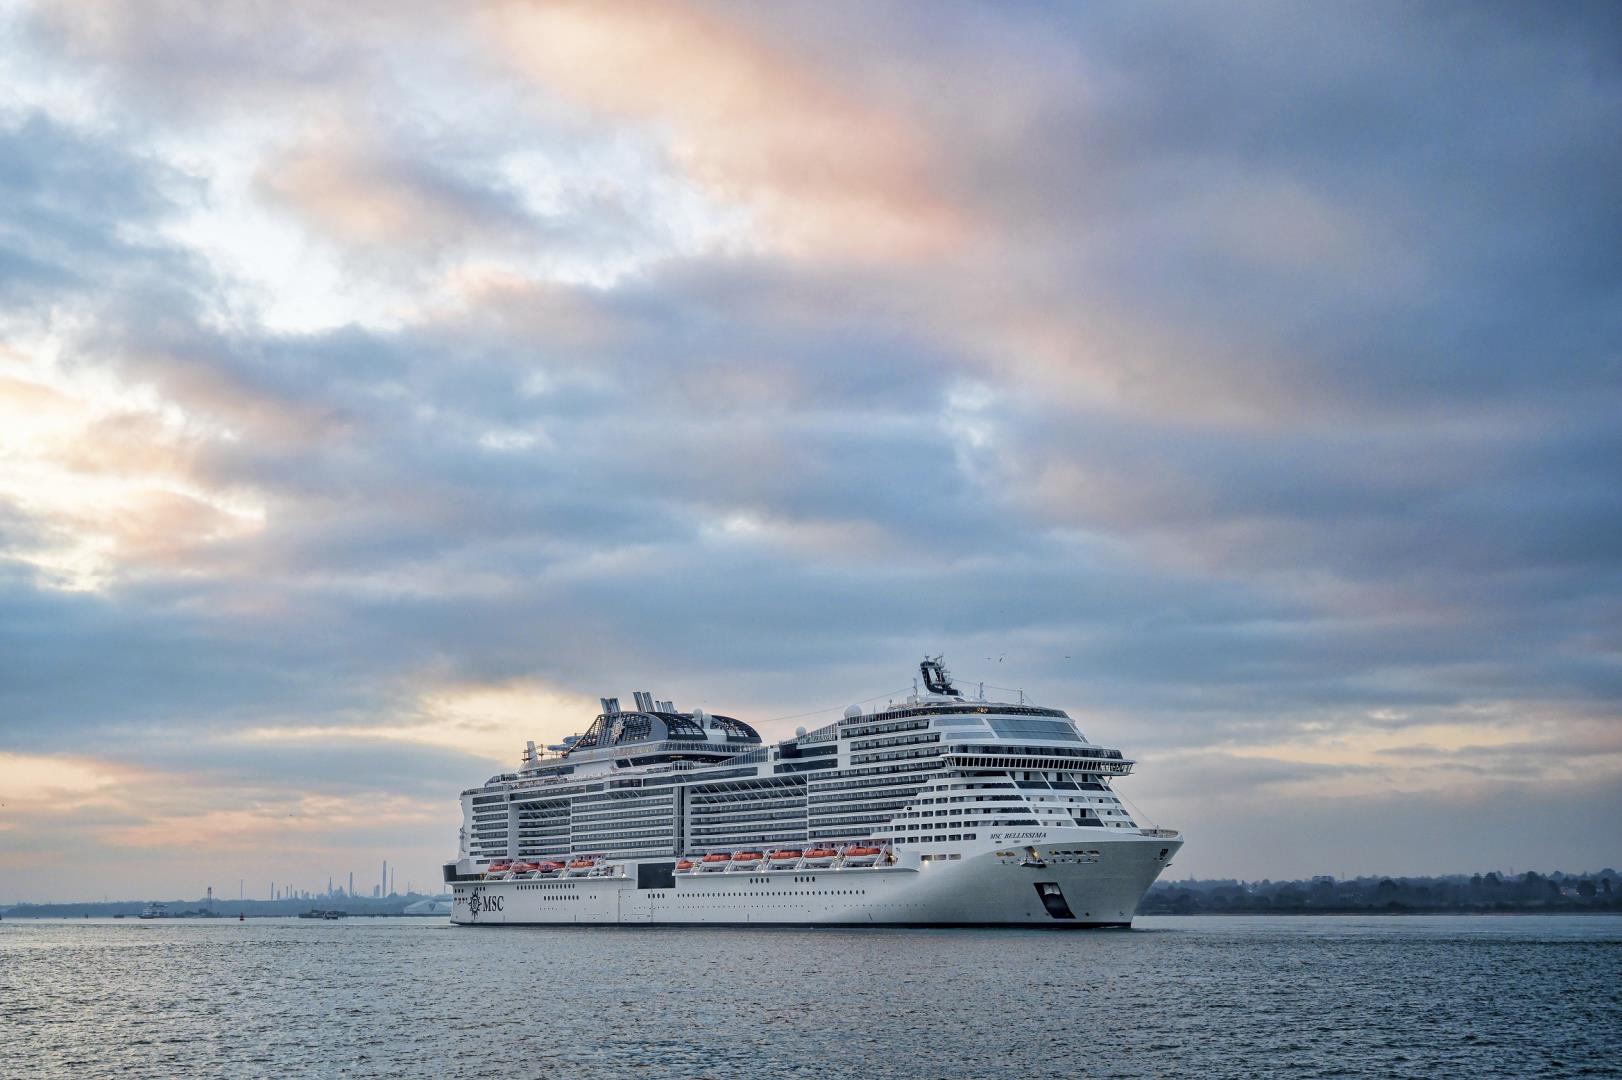 01 March 2019, MSC Bellissima arrives at Southampton to be christened